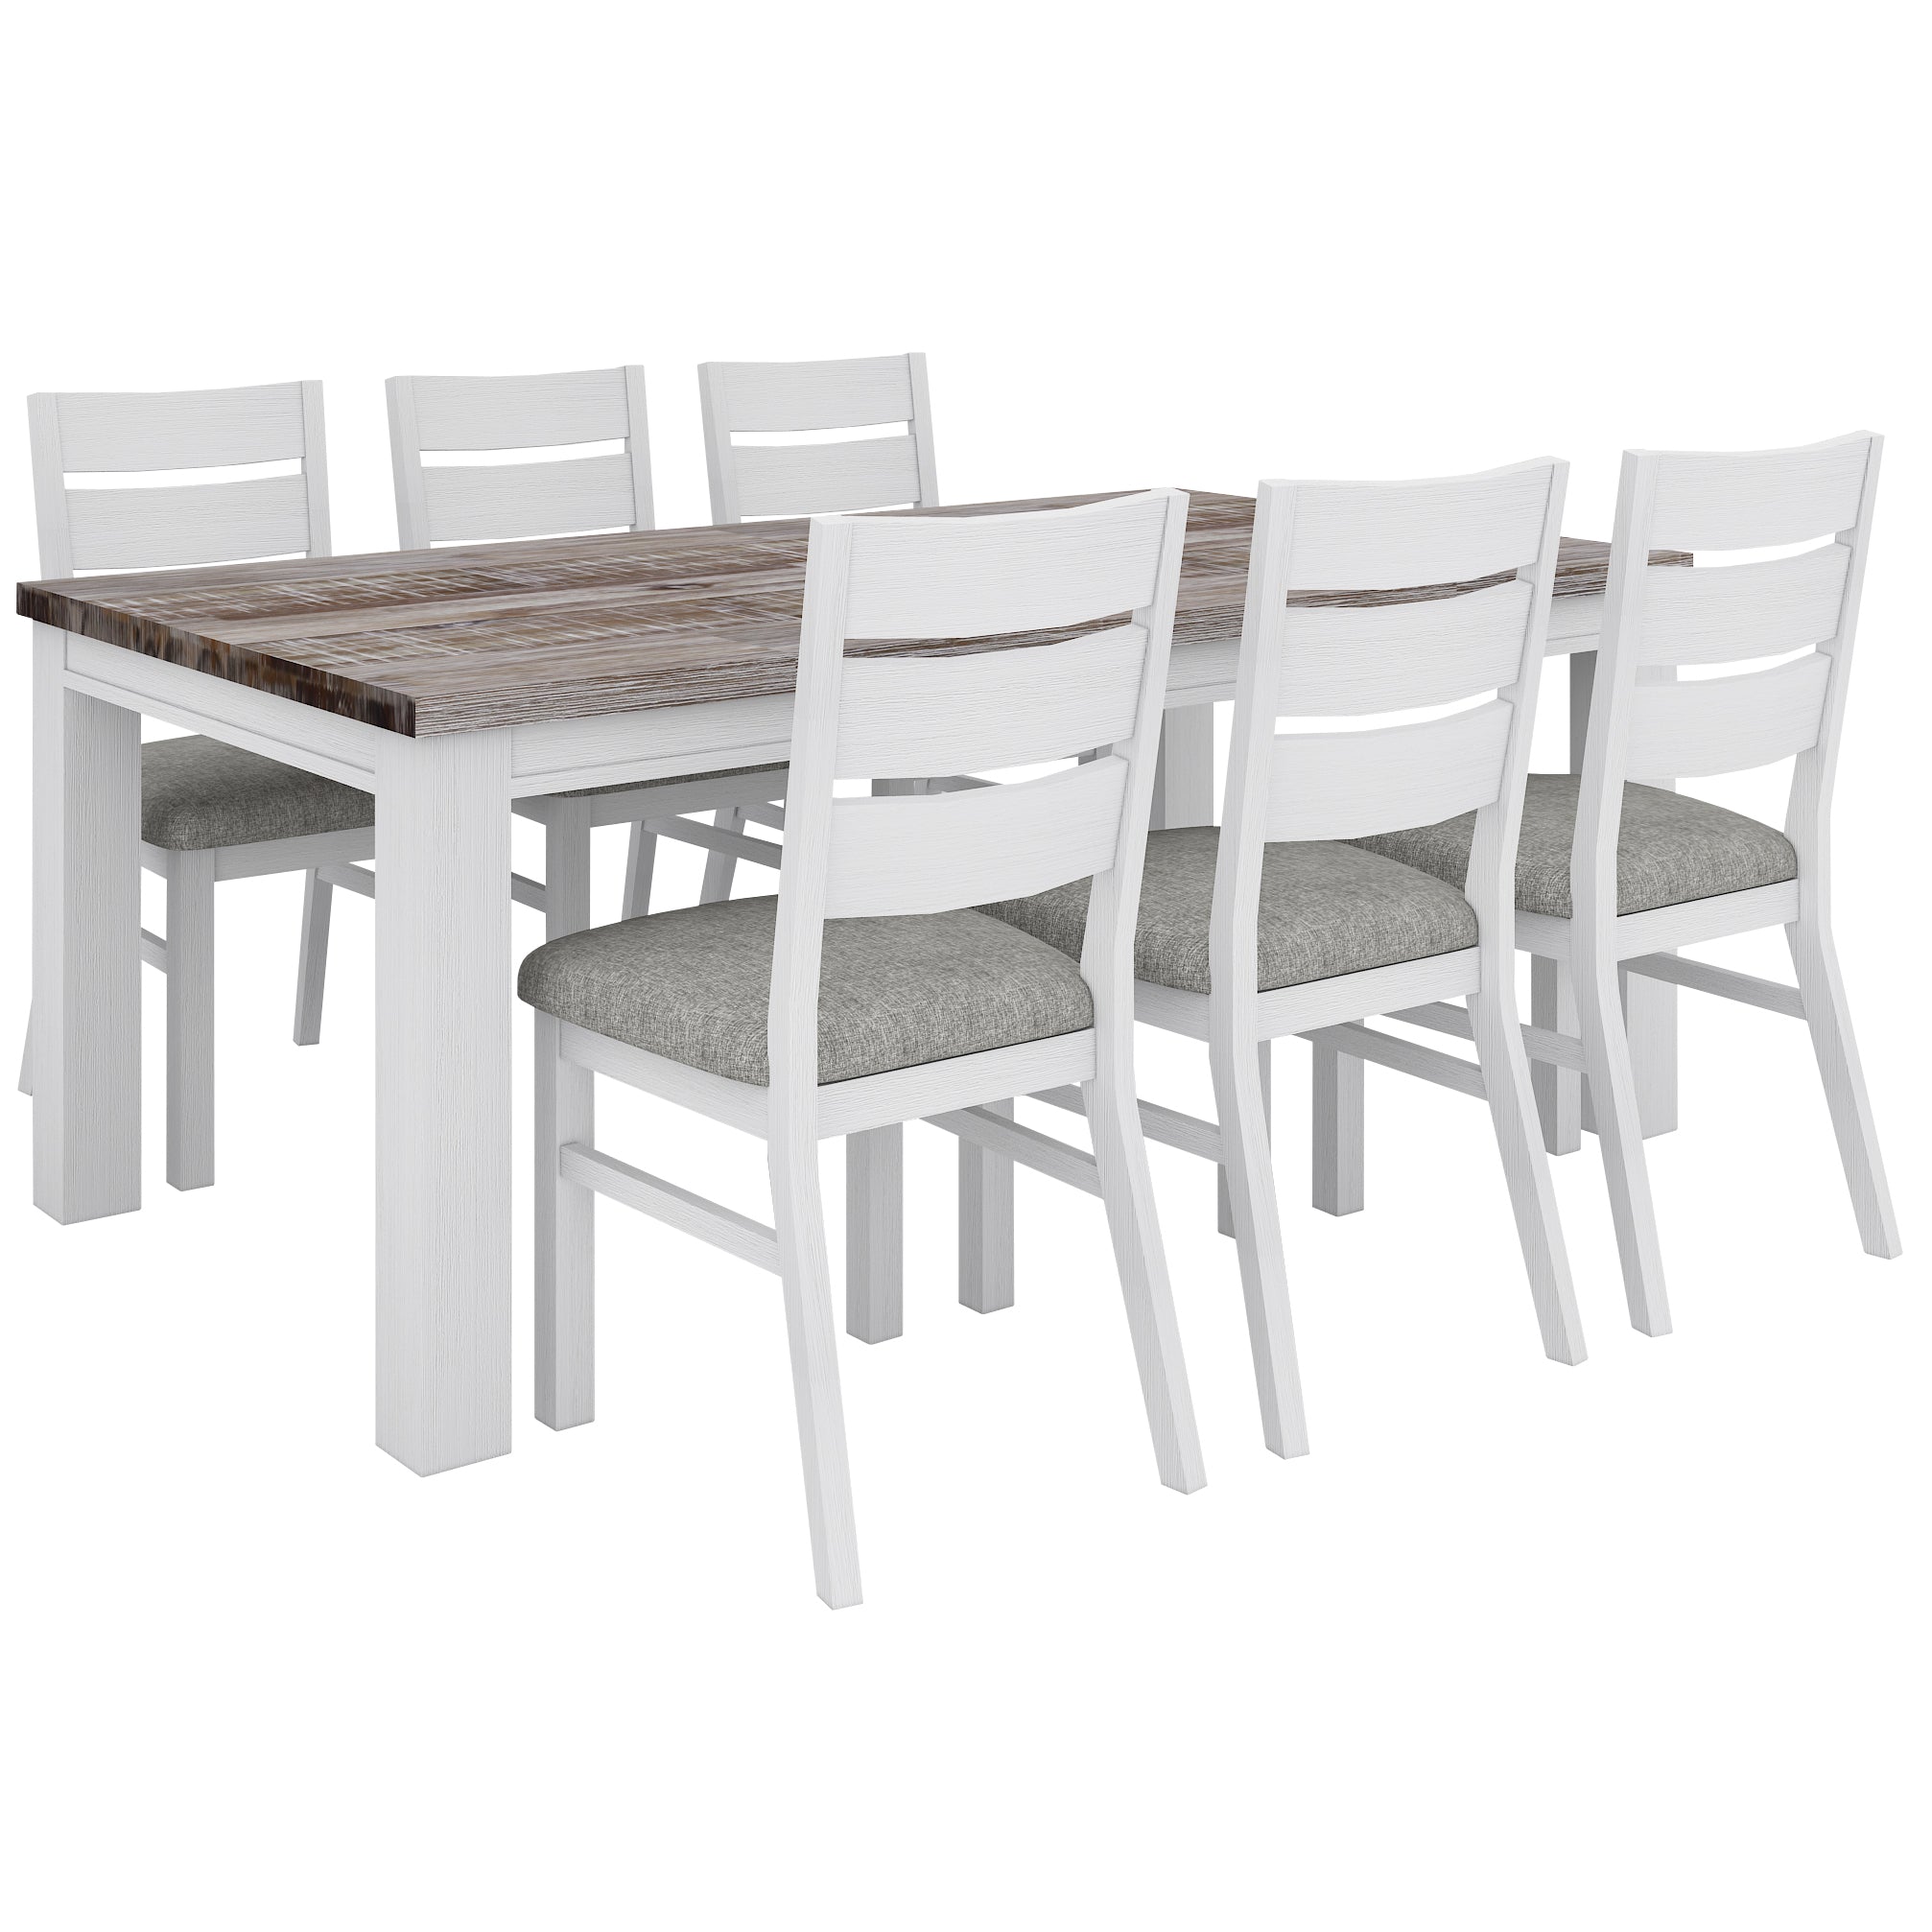 Plumeria 7pc Dining Set 190cm Table 6 Chair Solid Acacia Wood - White Brush - SILBERSHELL